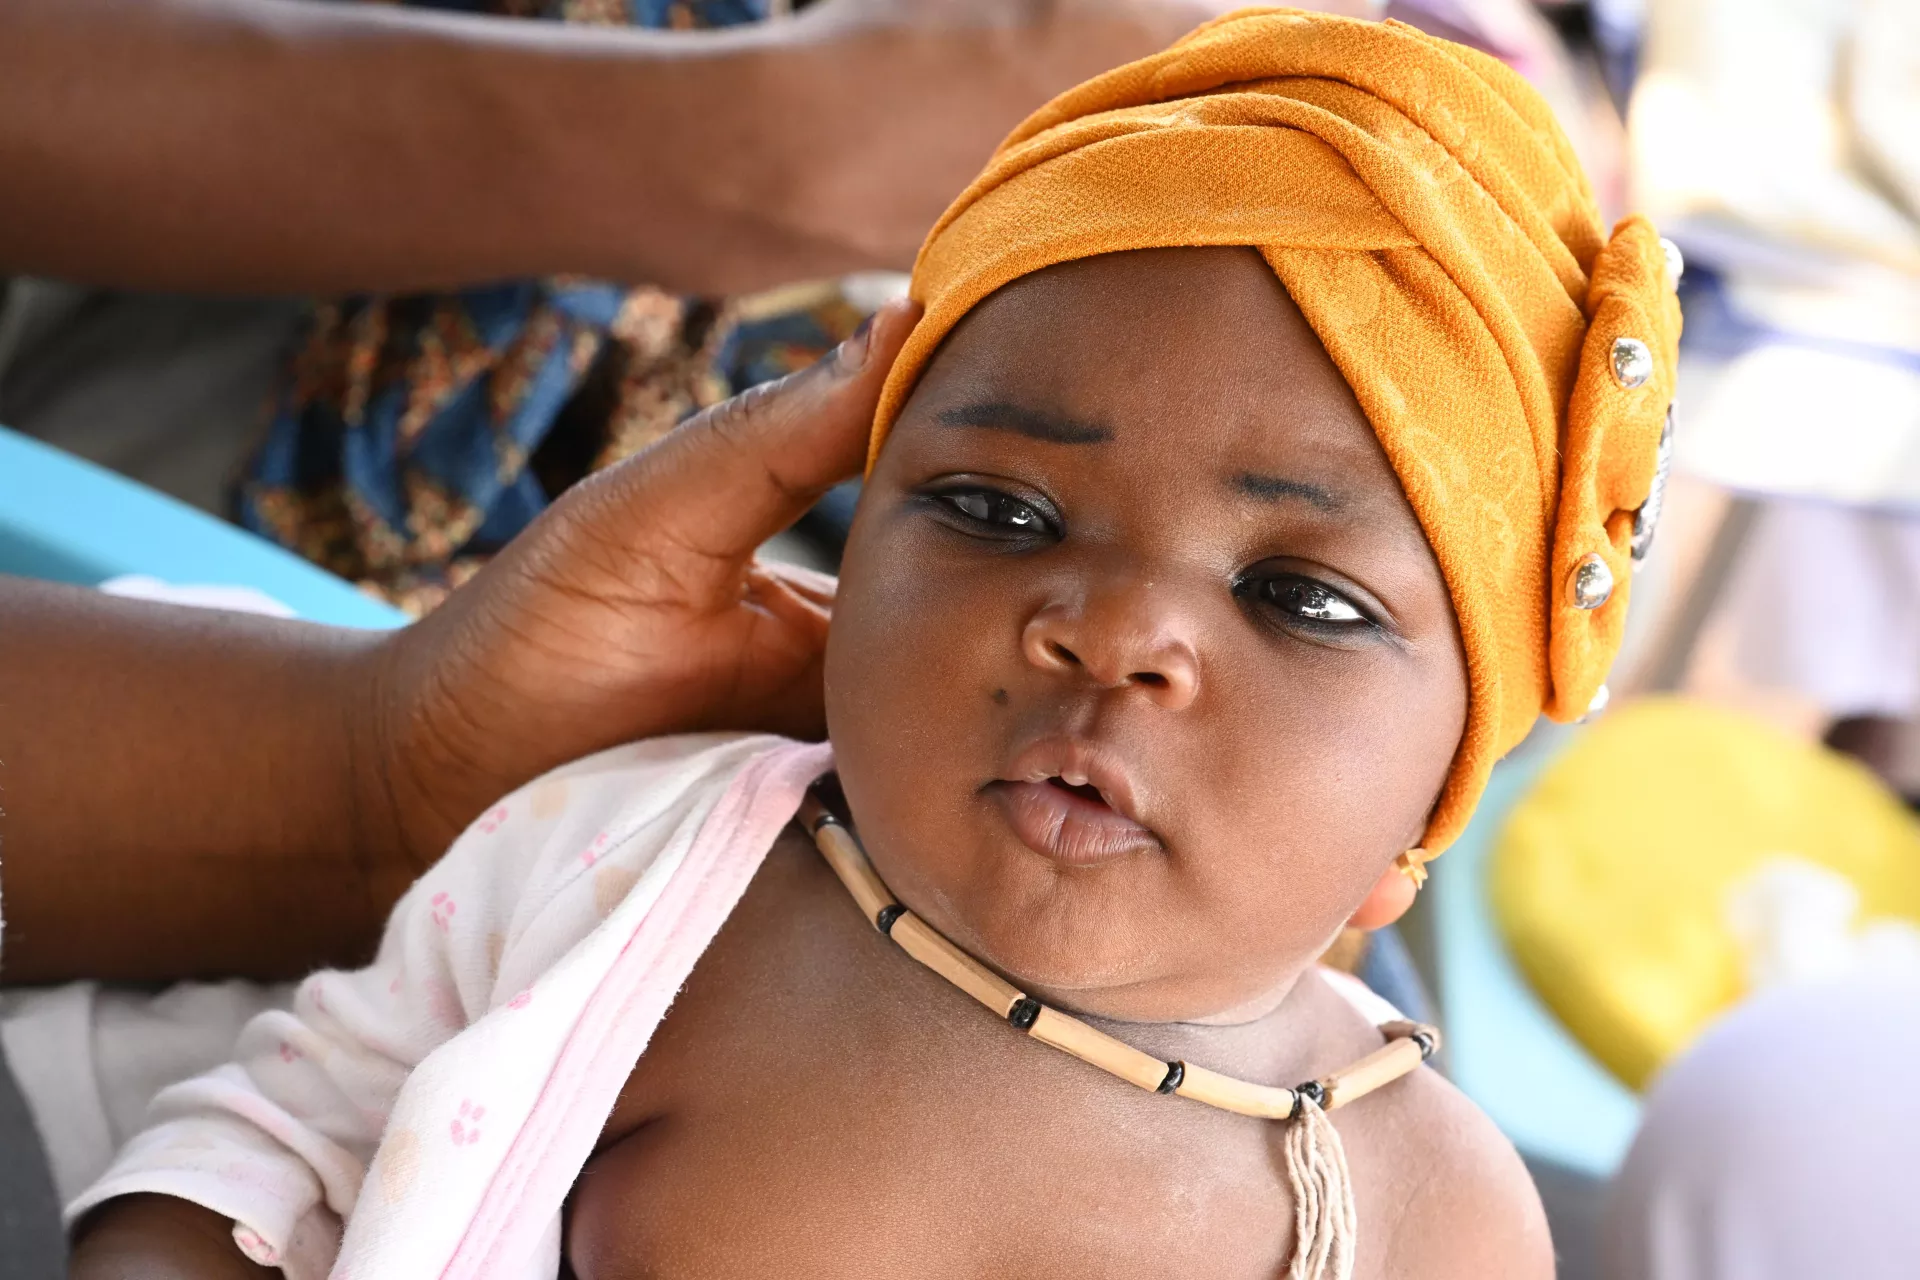 A baby waiting to be vaccinated.